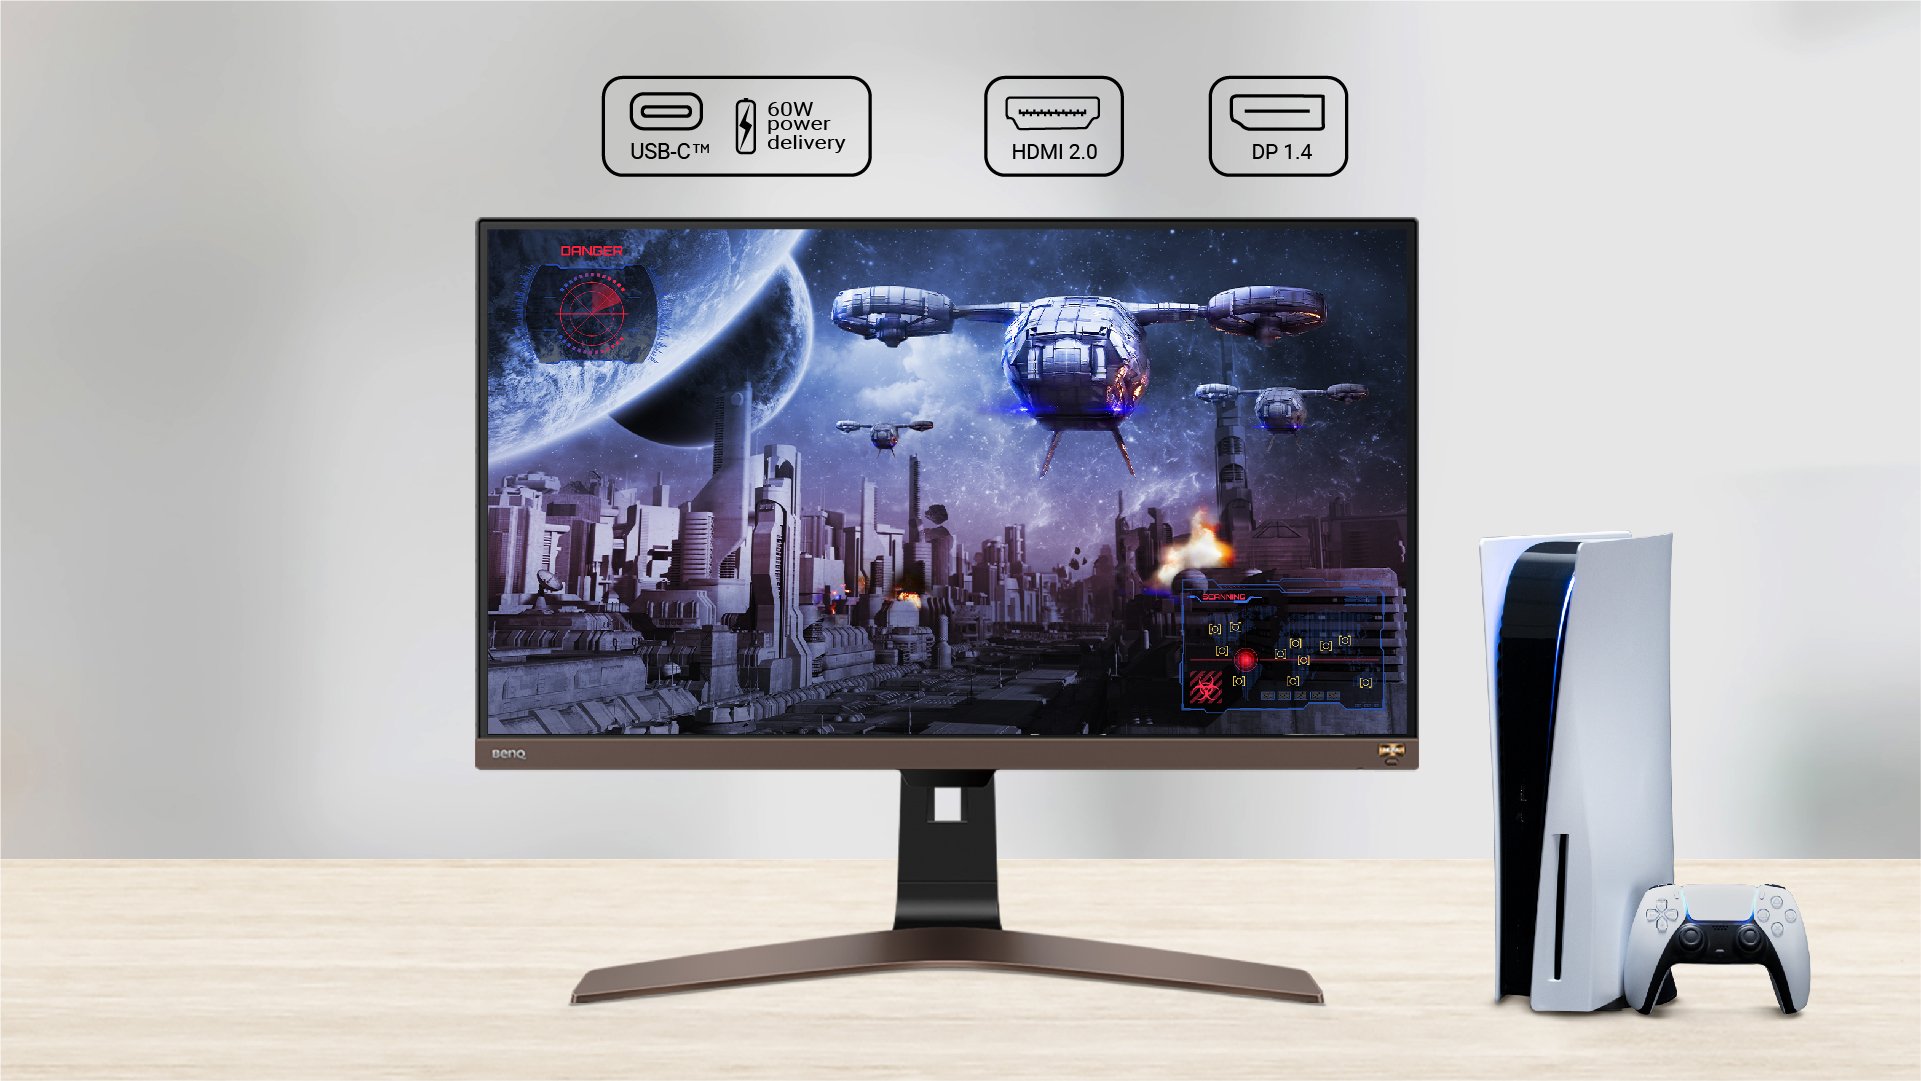 benq ew2880u with HDMI 2.0 and DP 1.4